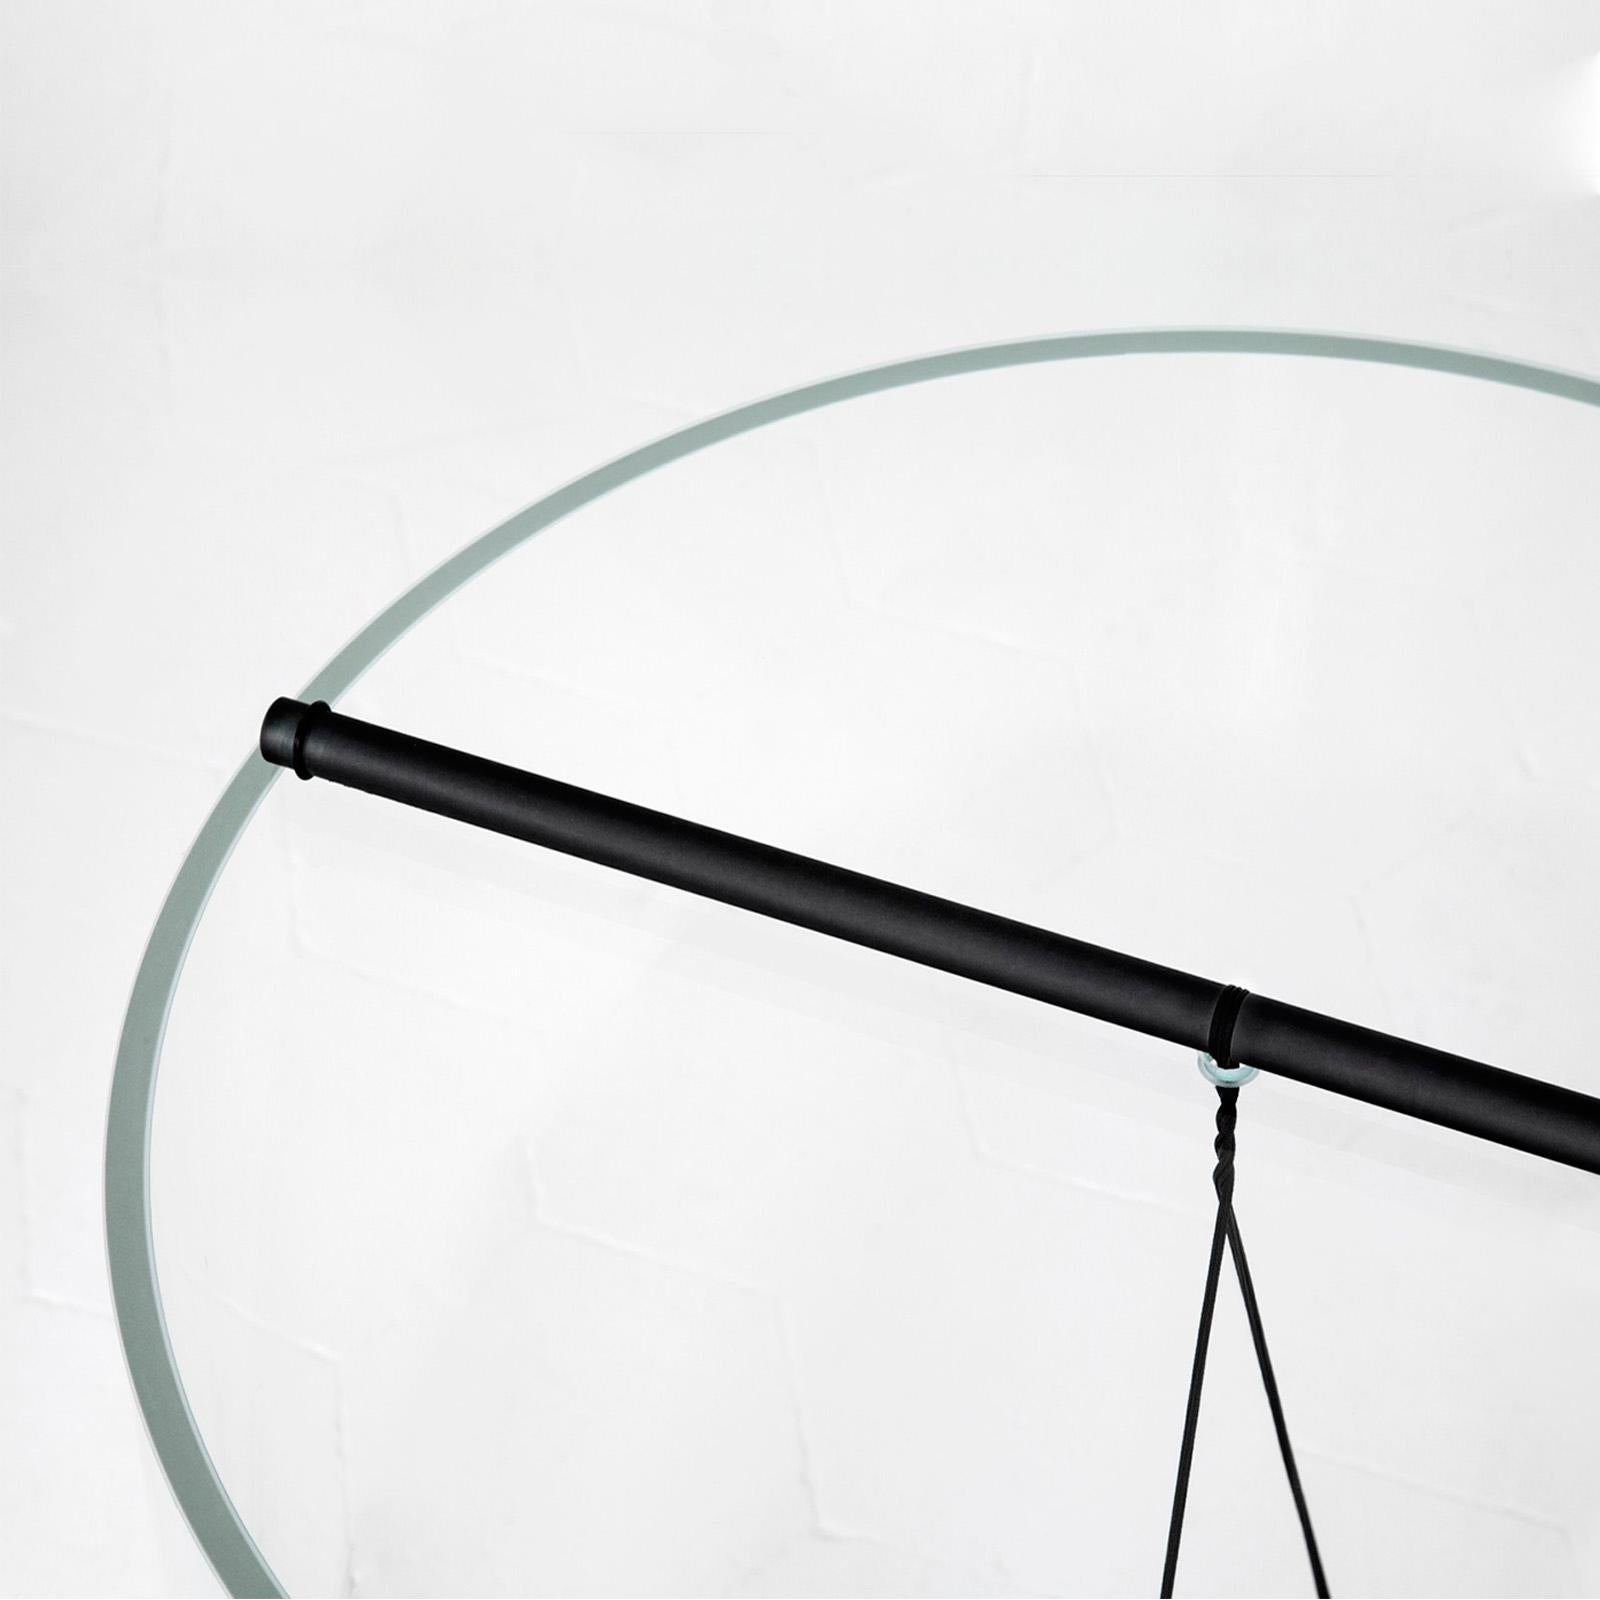 Italian Equilibrium Round Table with Glass Top by Guglielmo Poletti